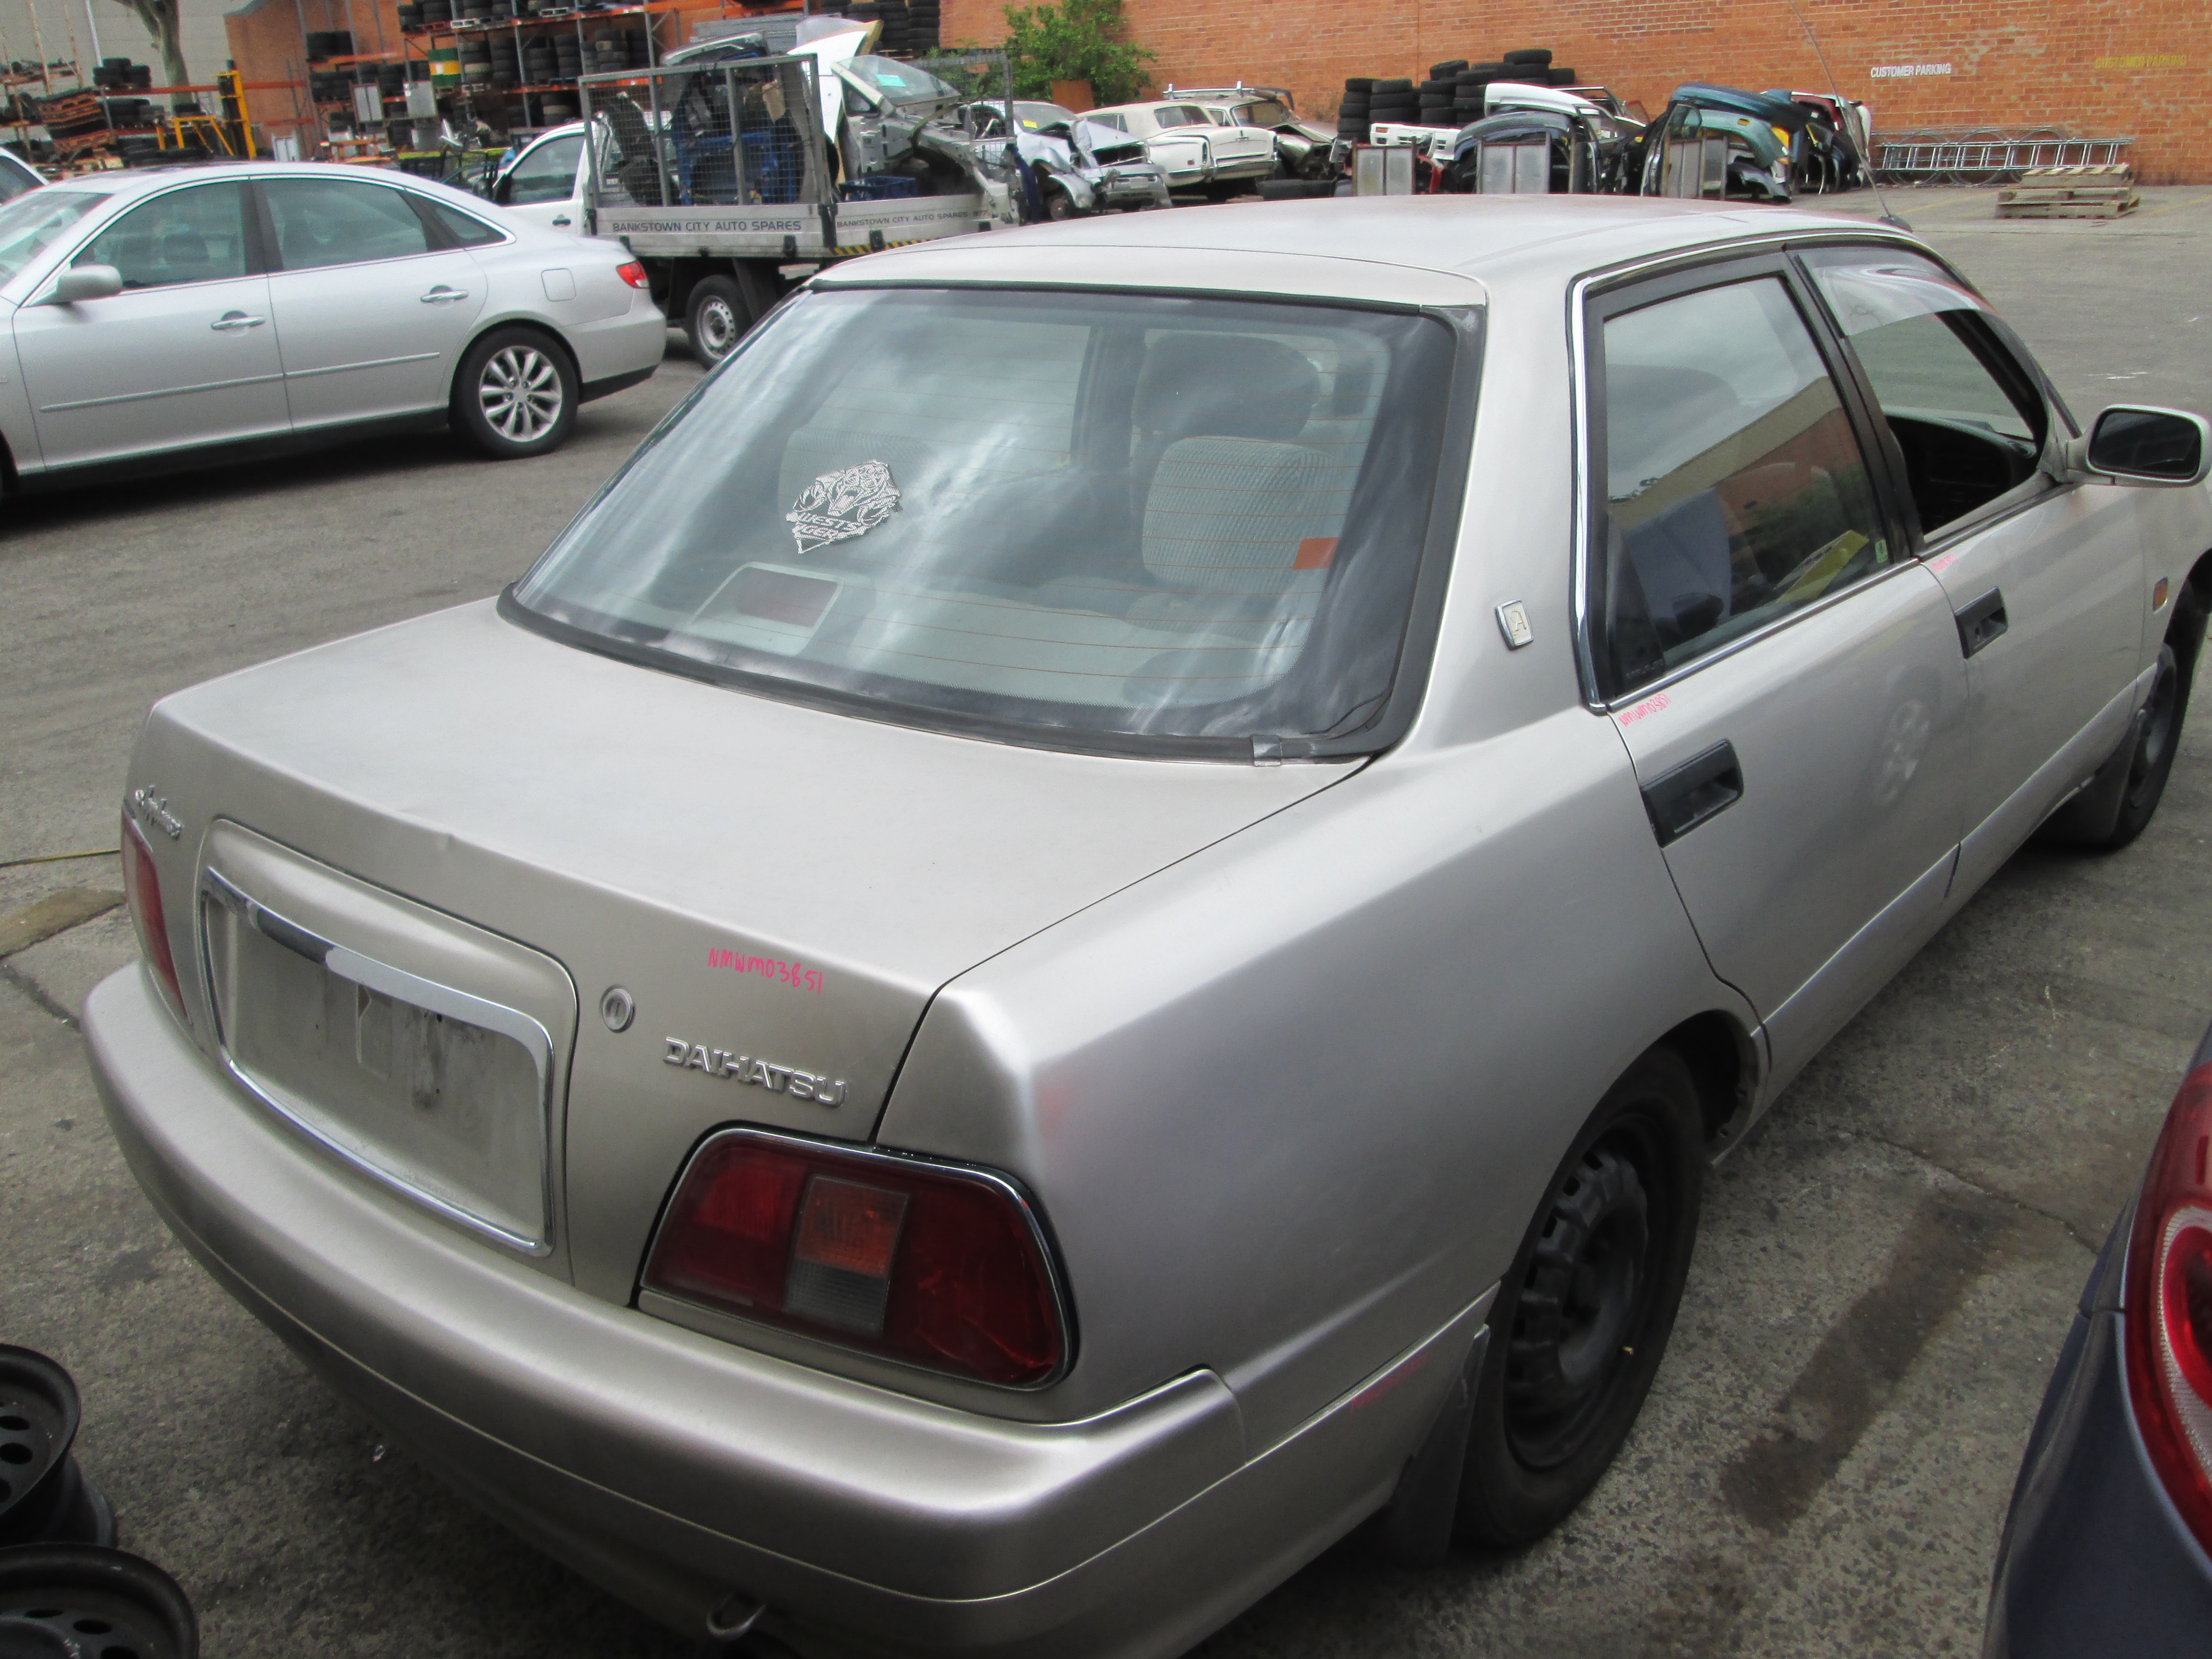   Wrecking Daihatsu Applause  1 6i M Gold for spare car 